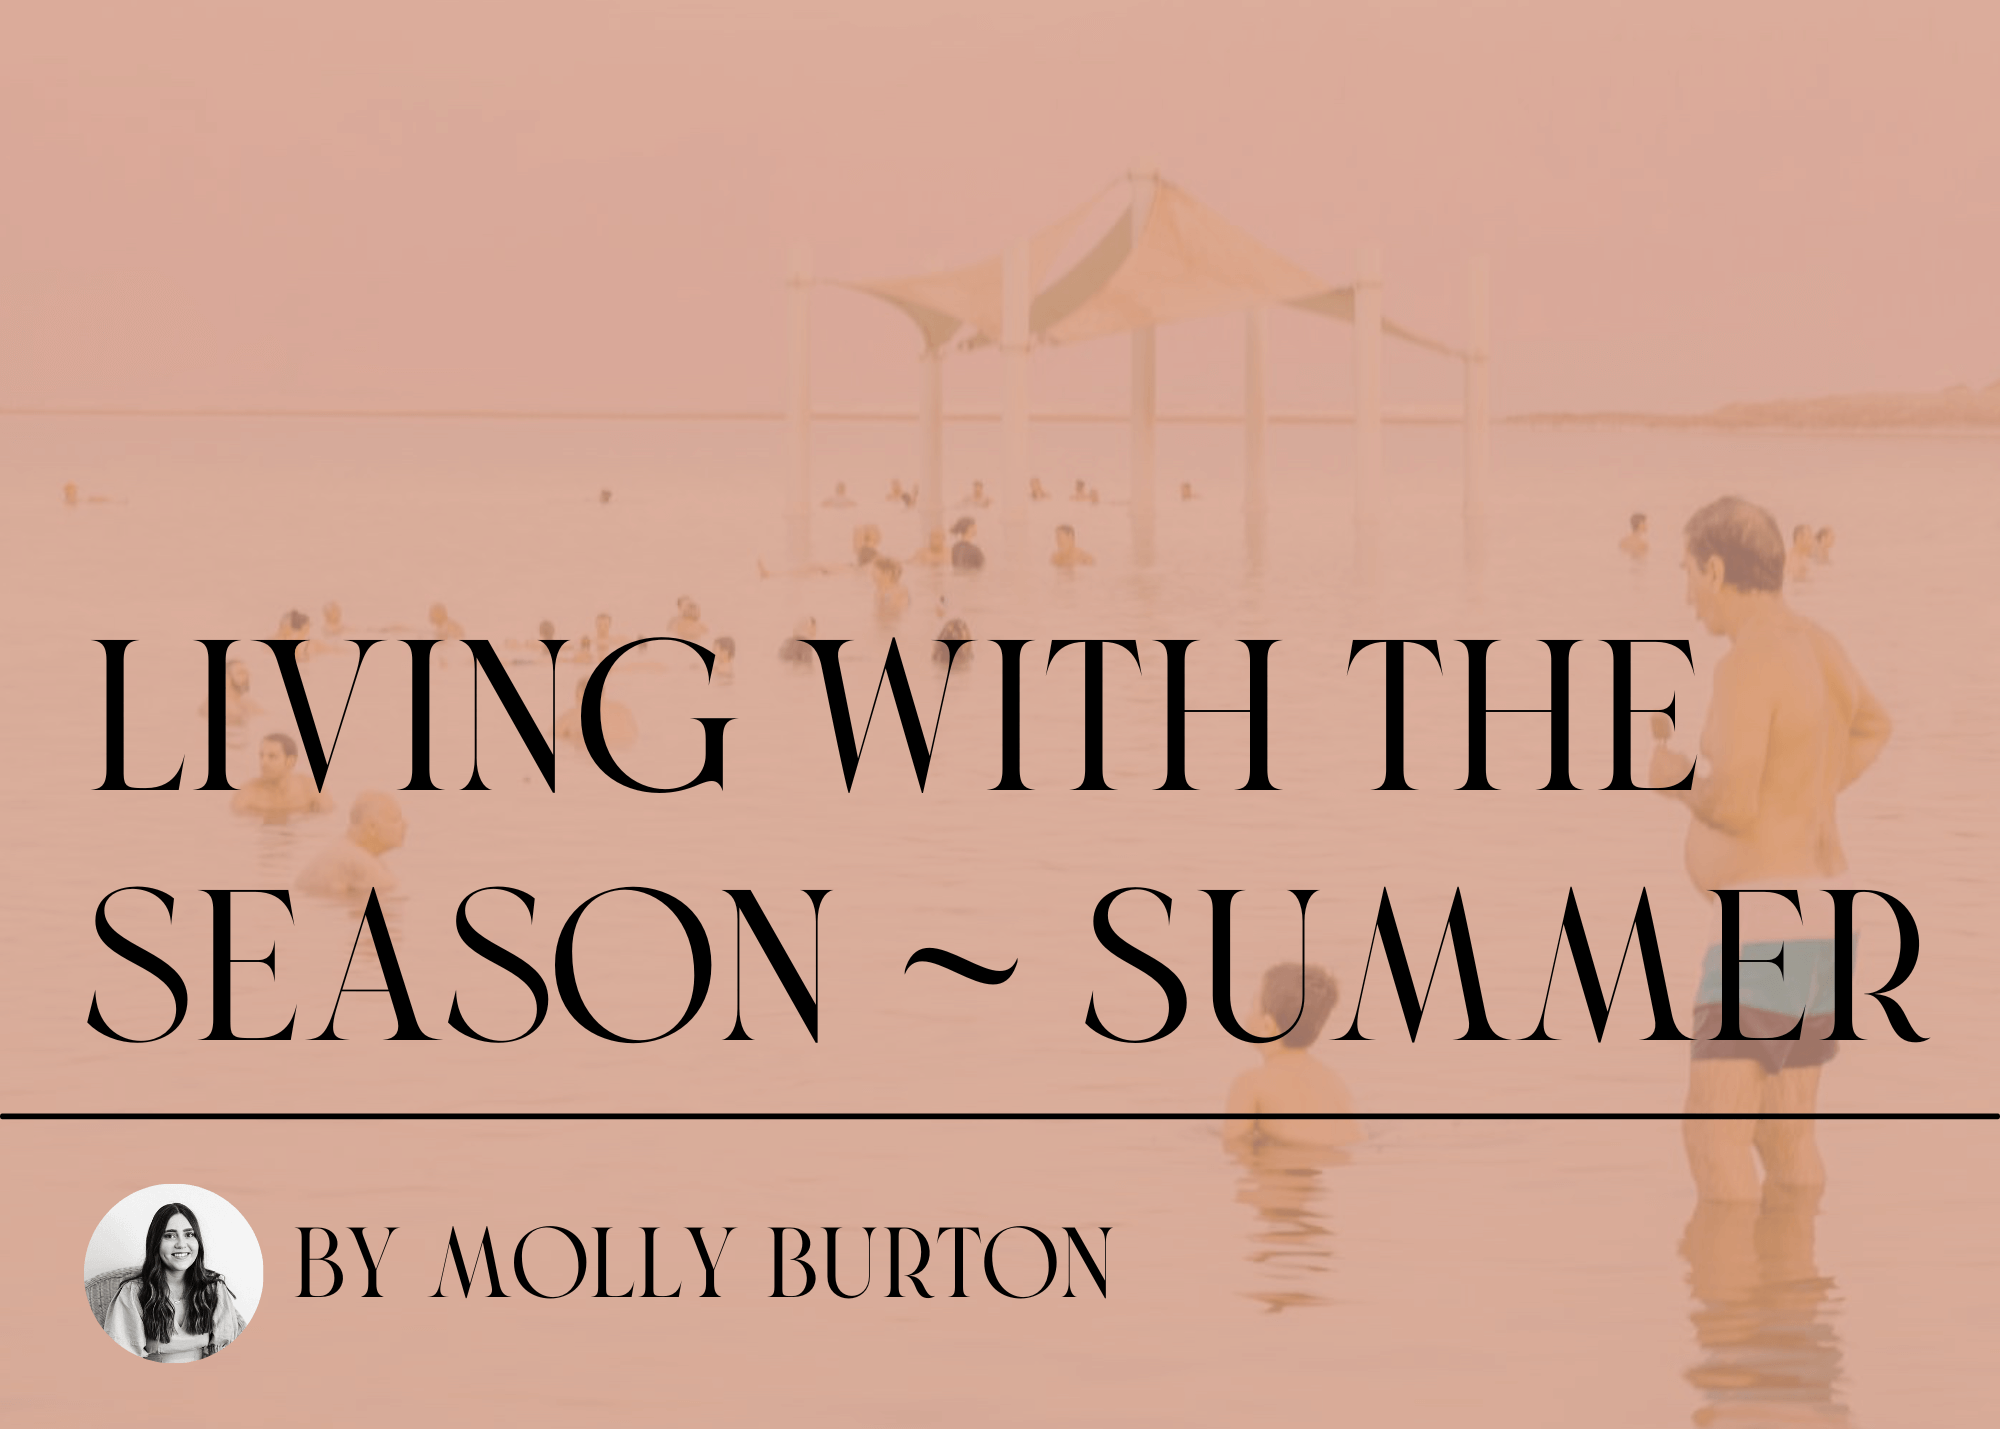 How to live harmoniously with the season of Summer?  ~